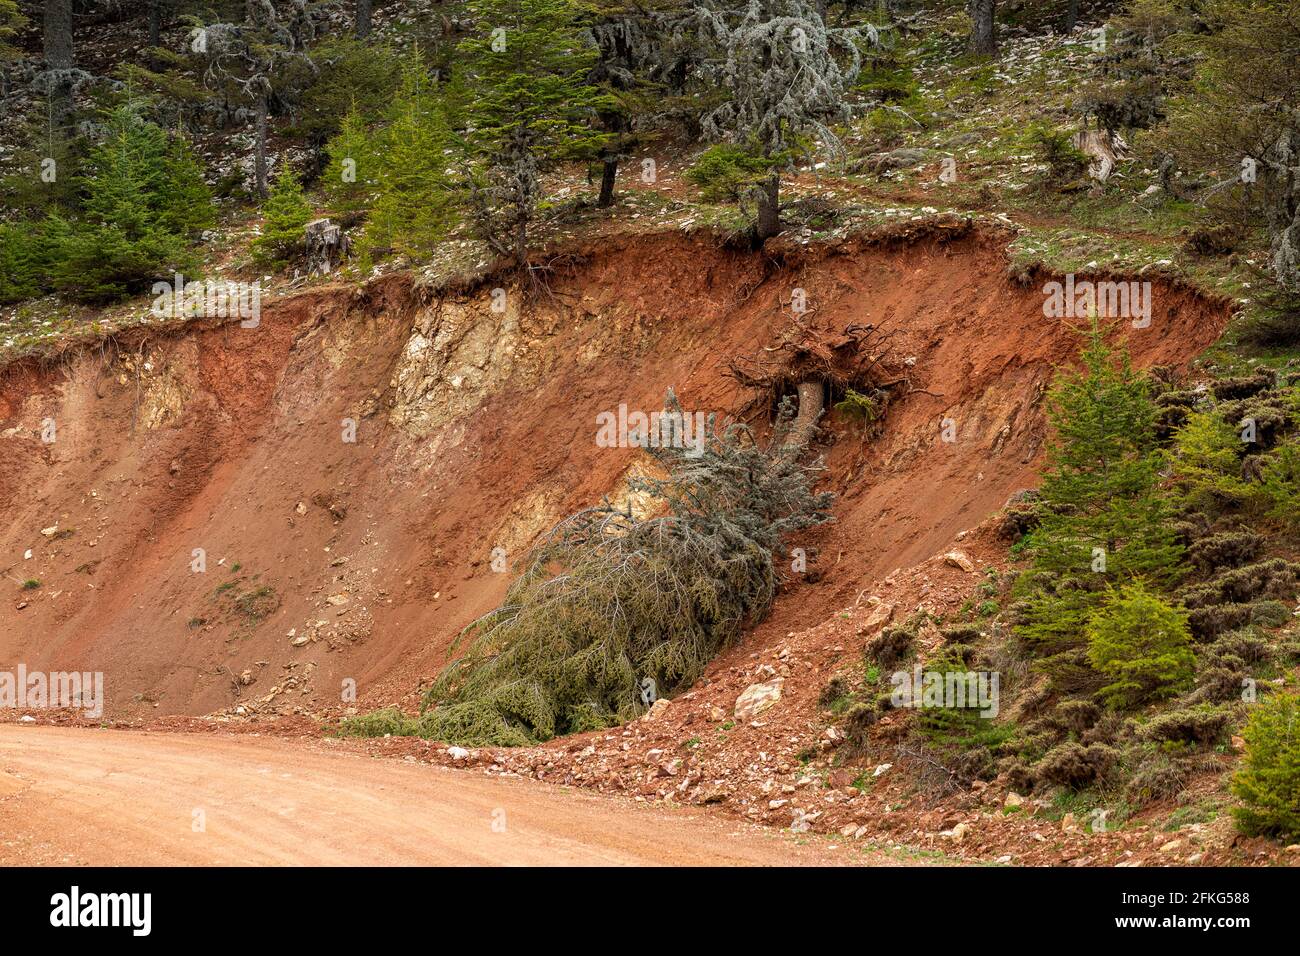 Tree uprooted by a landslide at the edge of the forest Stock Photo